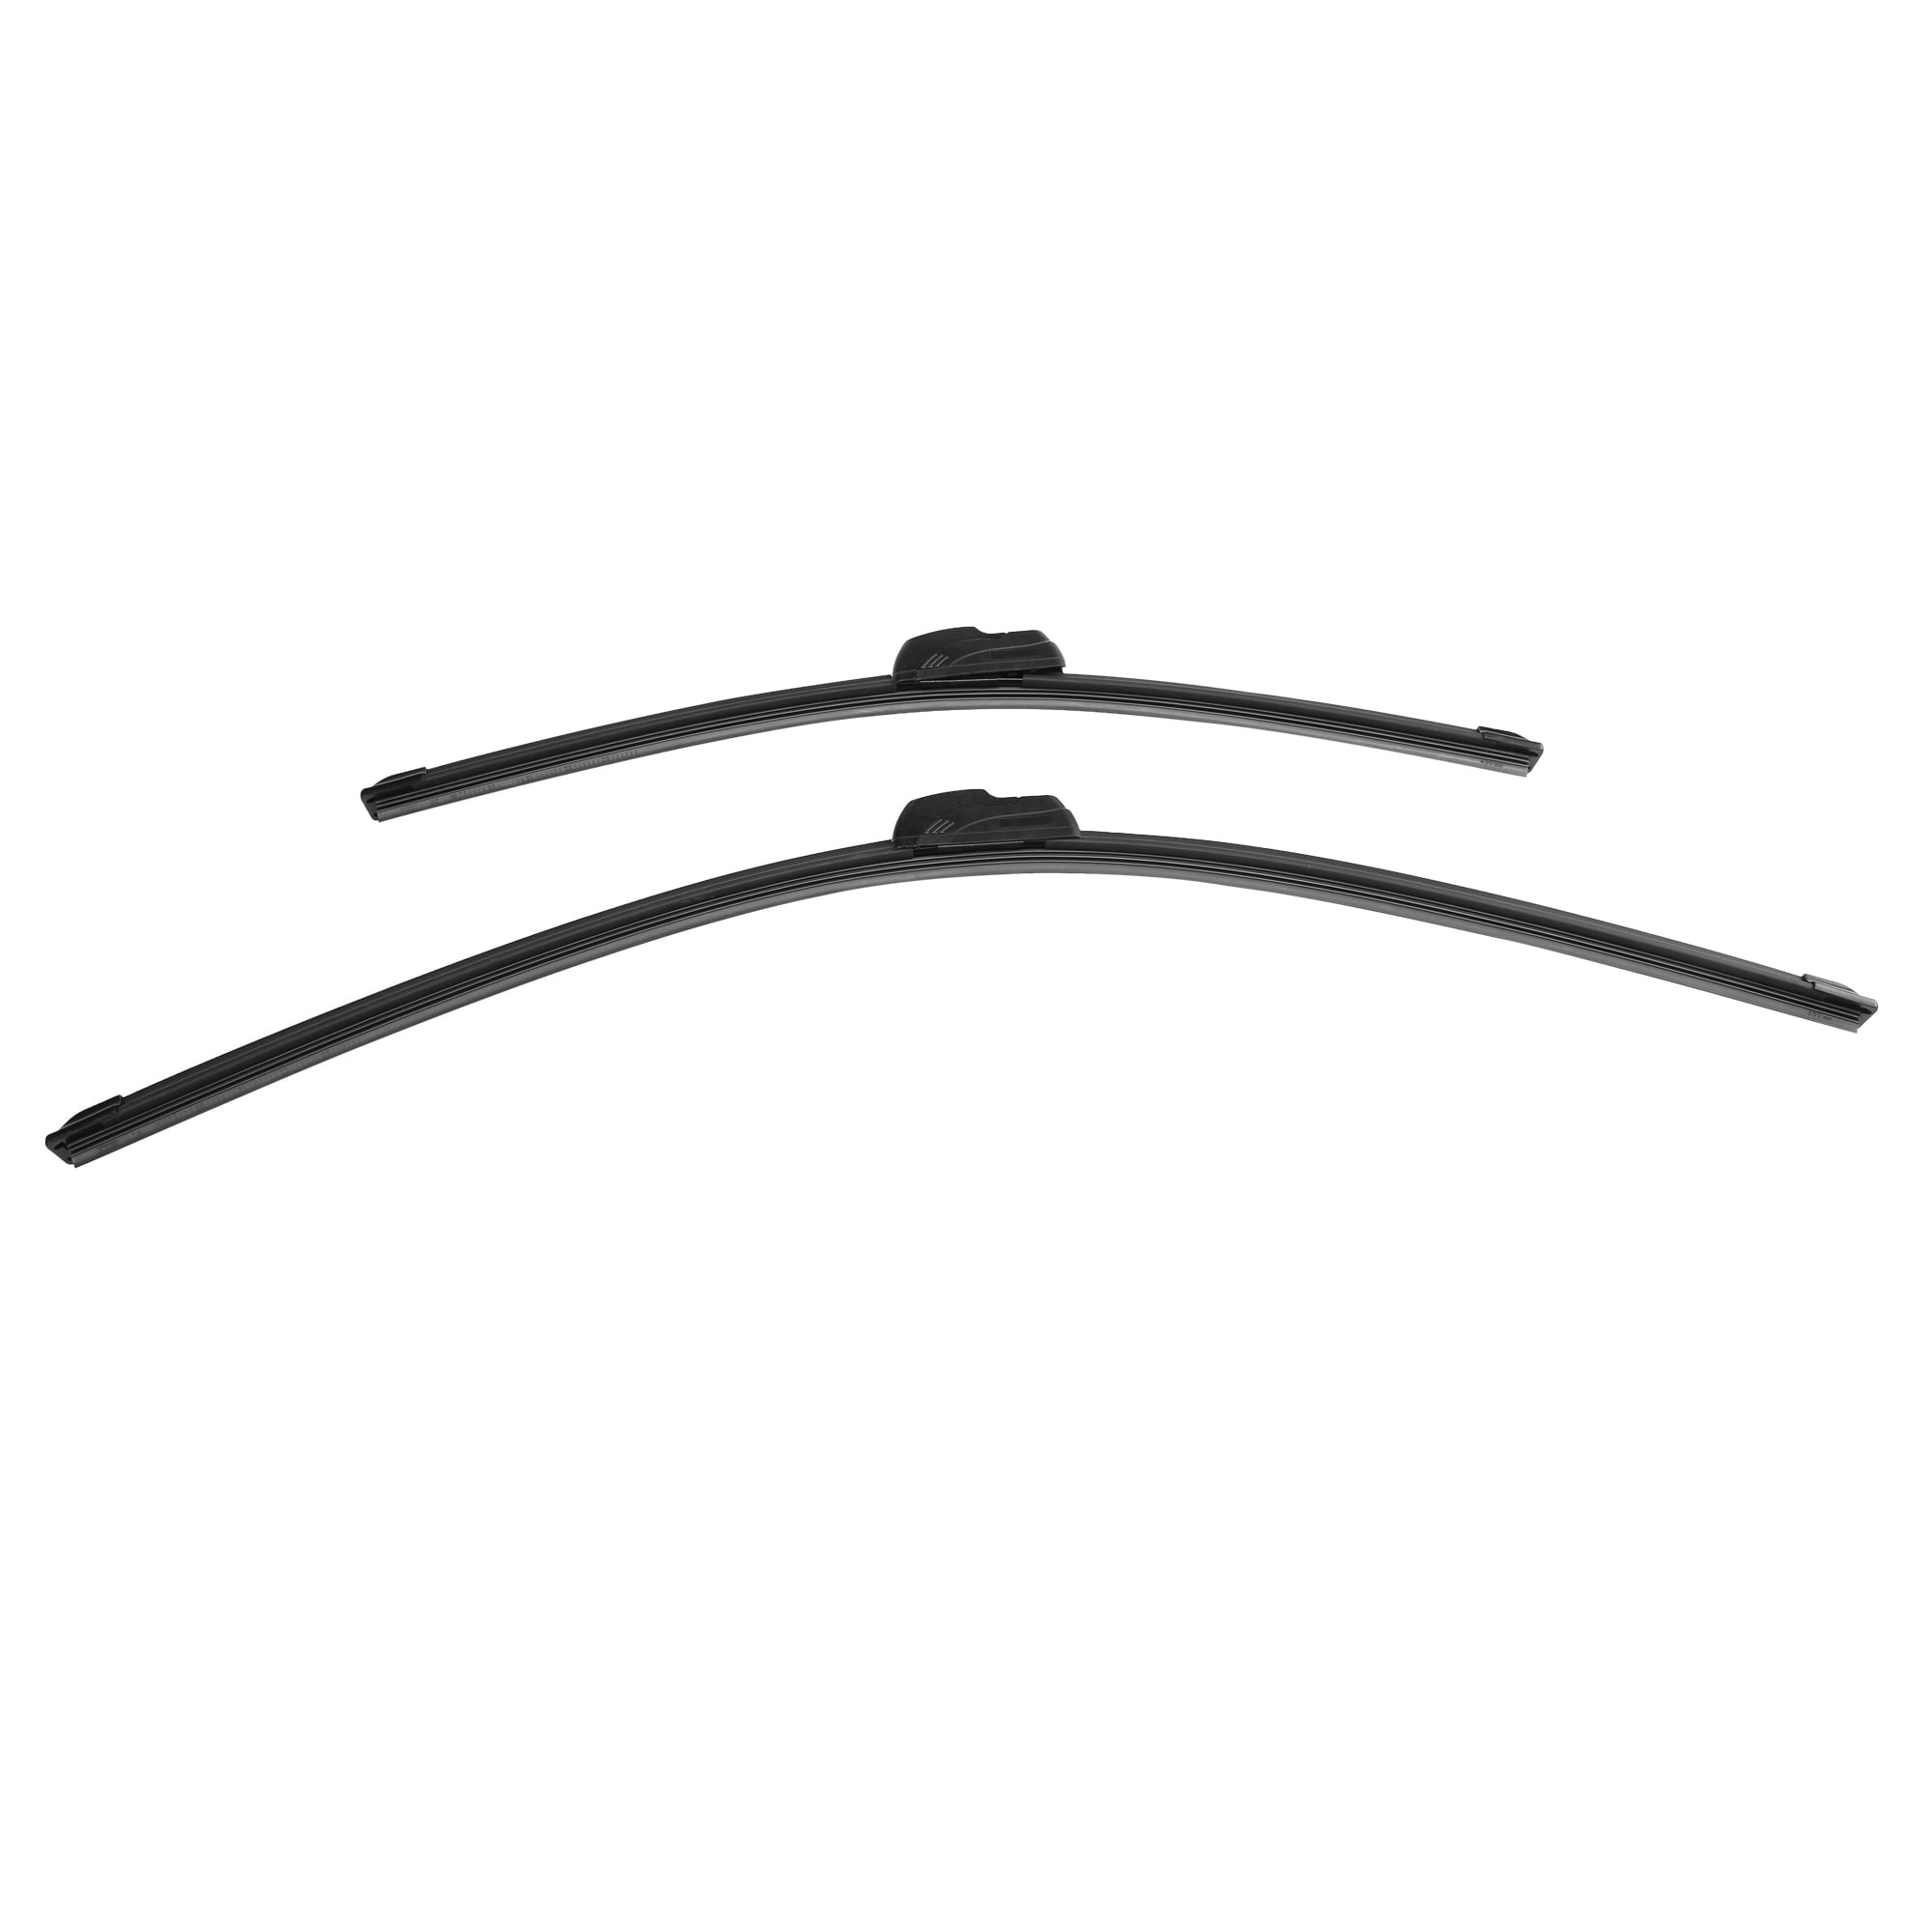 Front Wiper Blades for 2015 Jeep Cherokee - Walmart.com - Walmart.com 2015 Jeep Grand Cherokee Wiper Blade Size